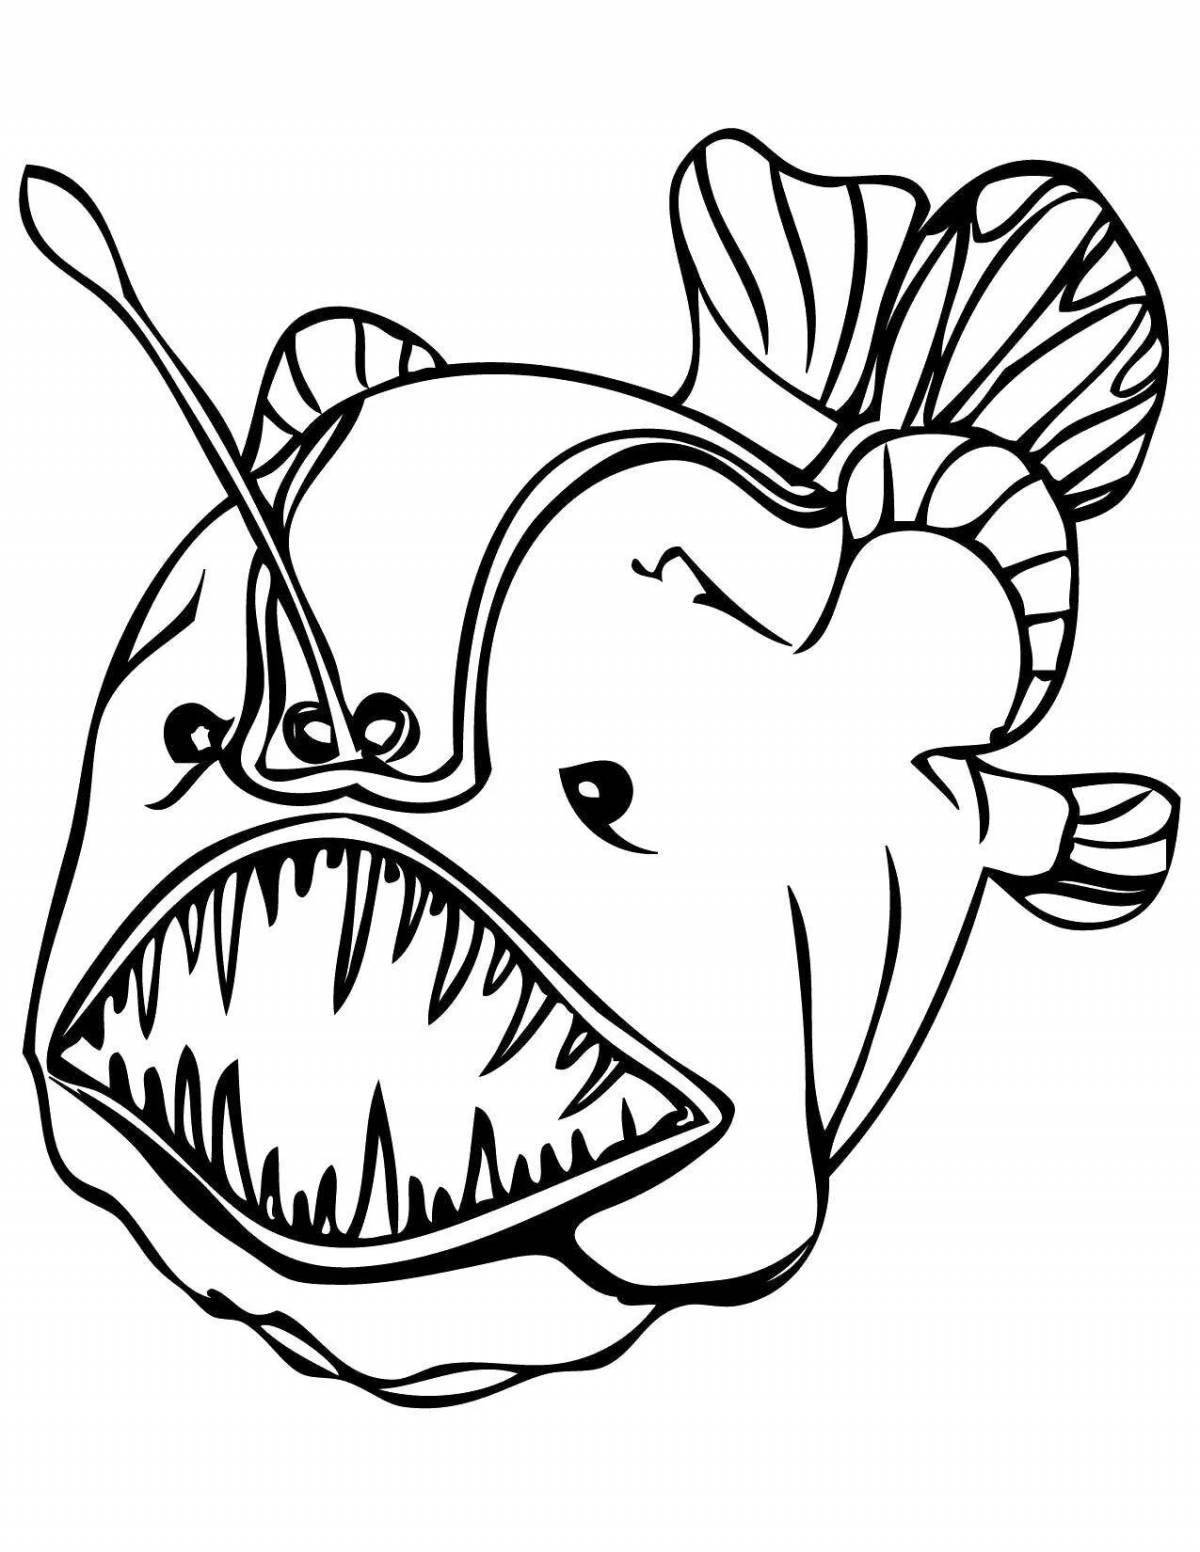 Prominent sea monster coloring page